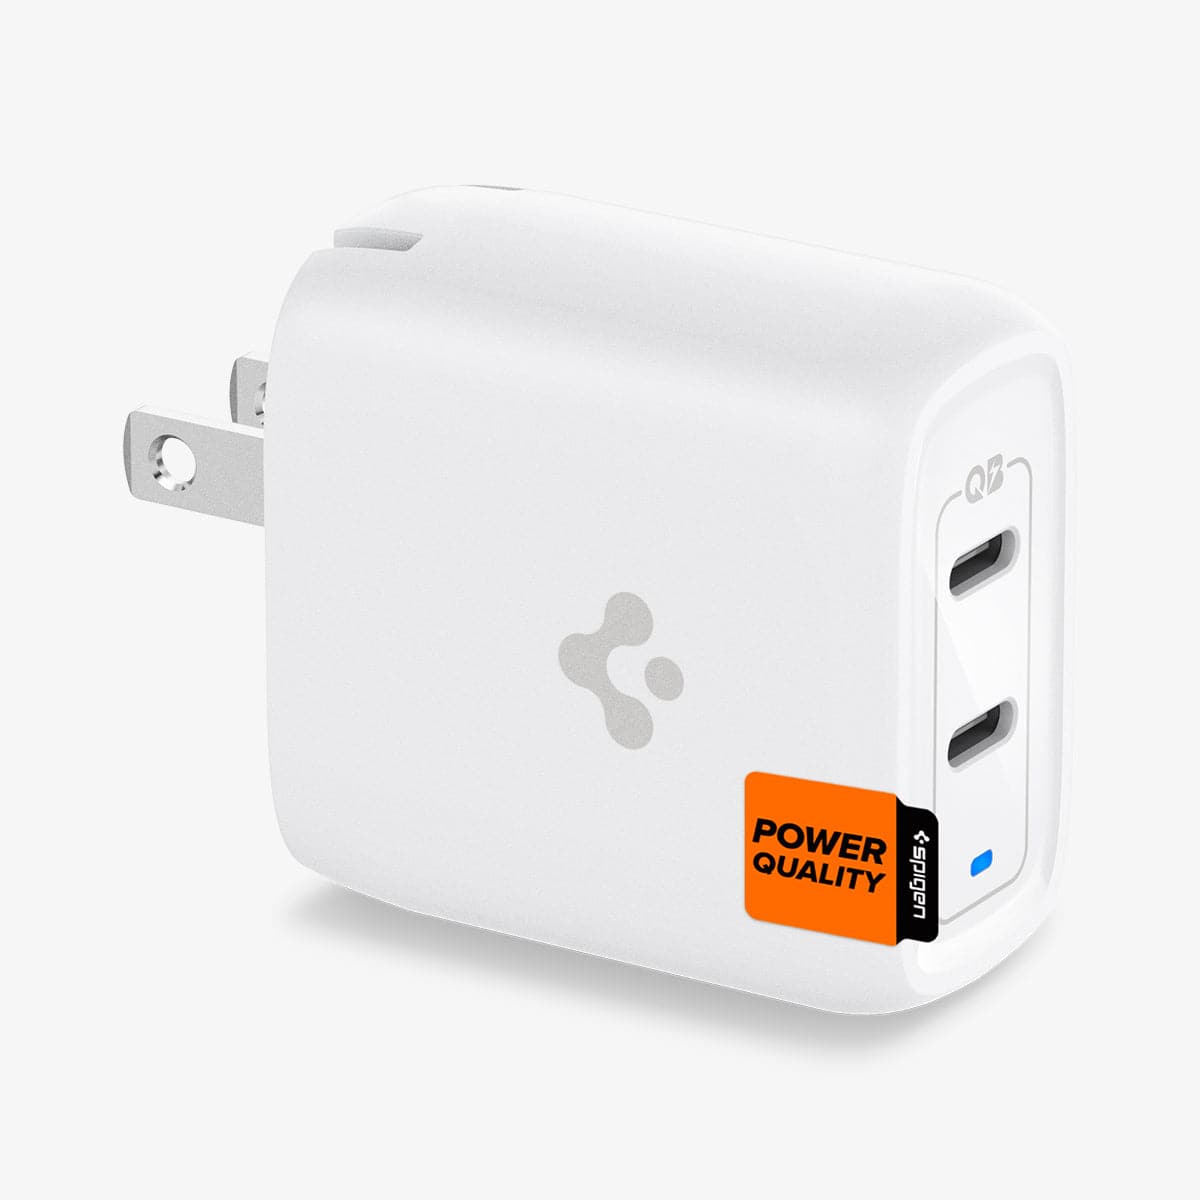 ACH02595 - ArcStation™ Pro 40W Wall Charger PE2013 in white showing the front, side and prongs with power quality sticker